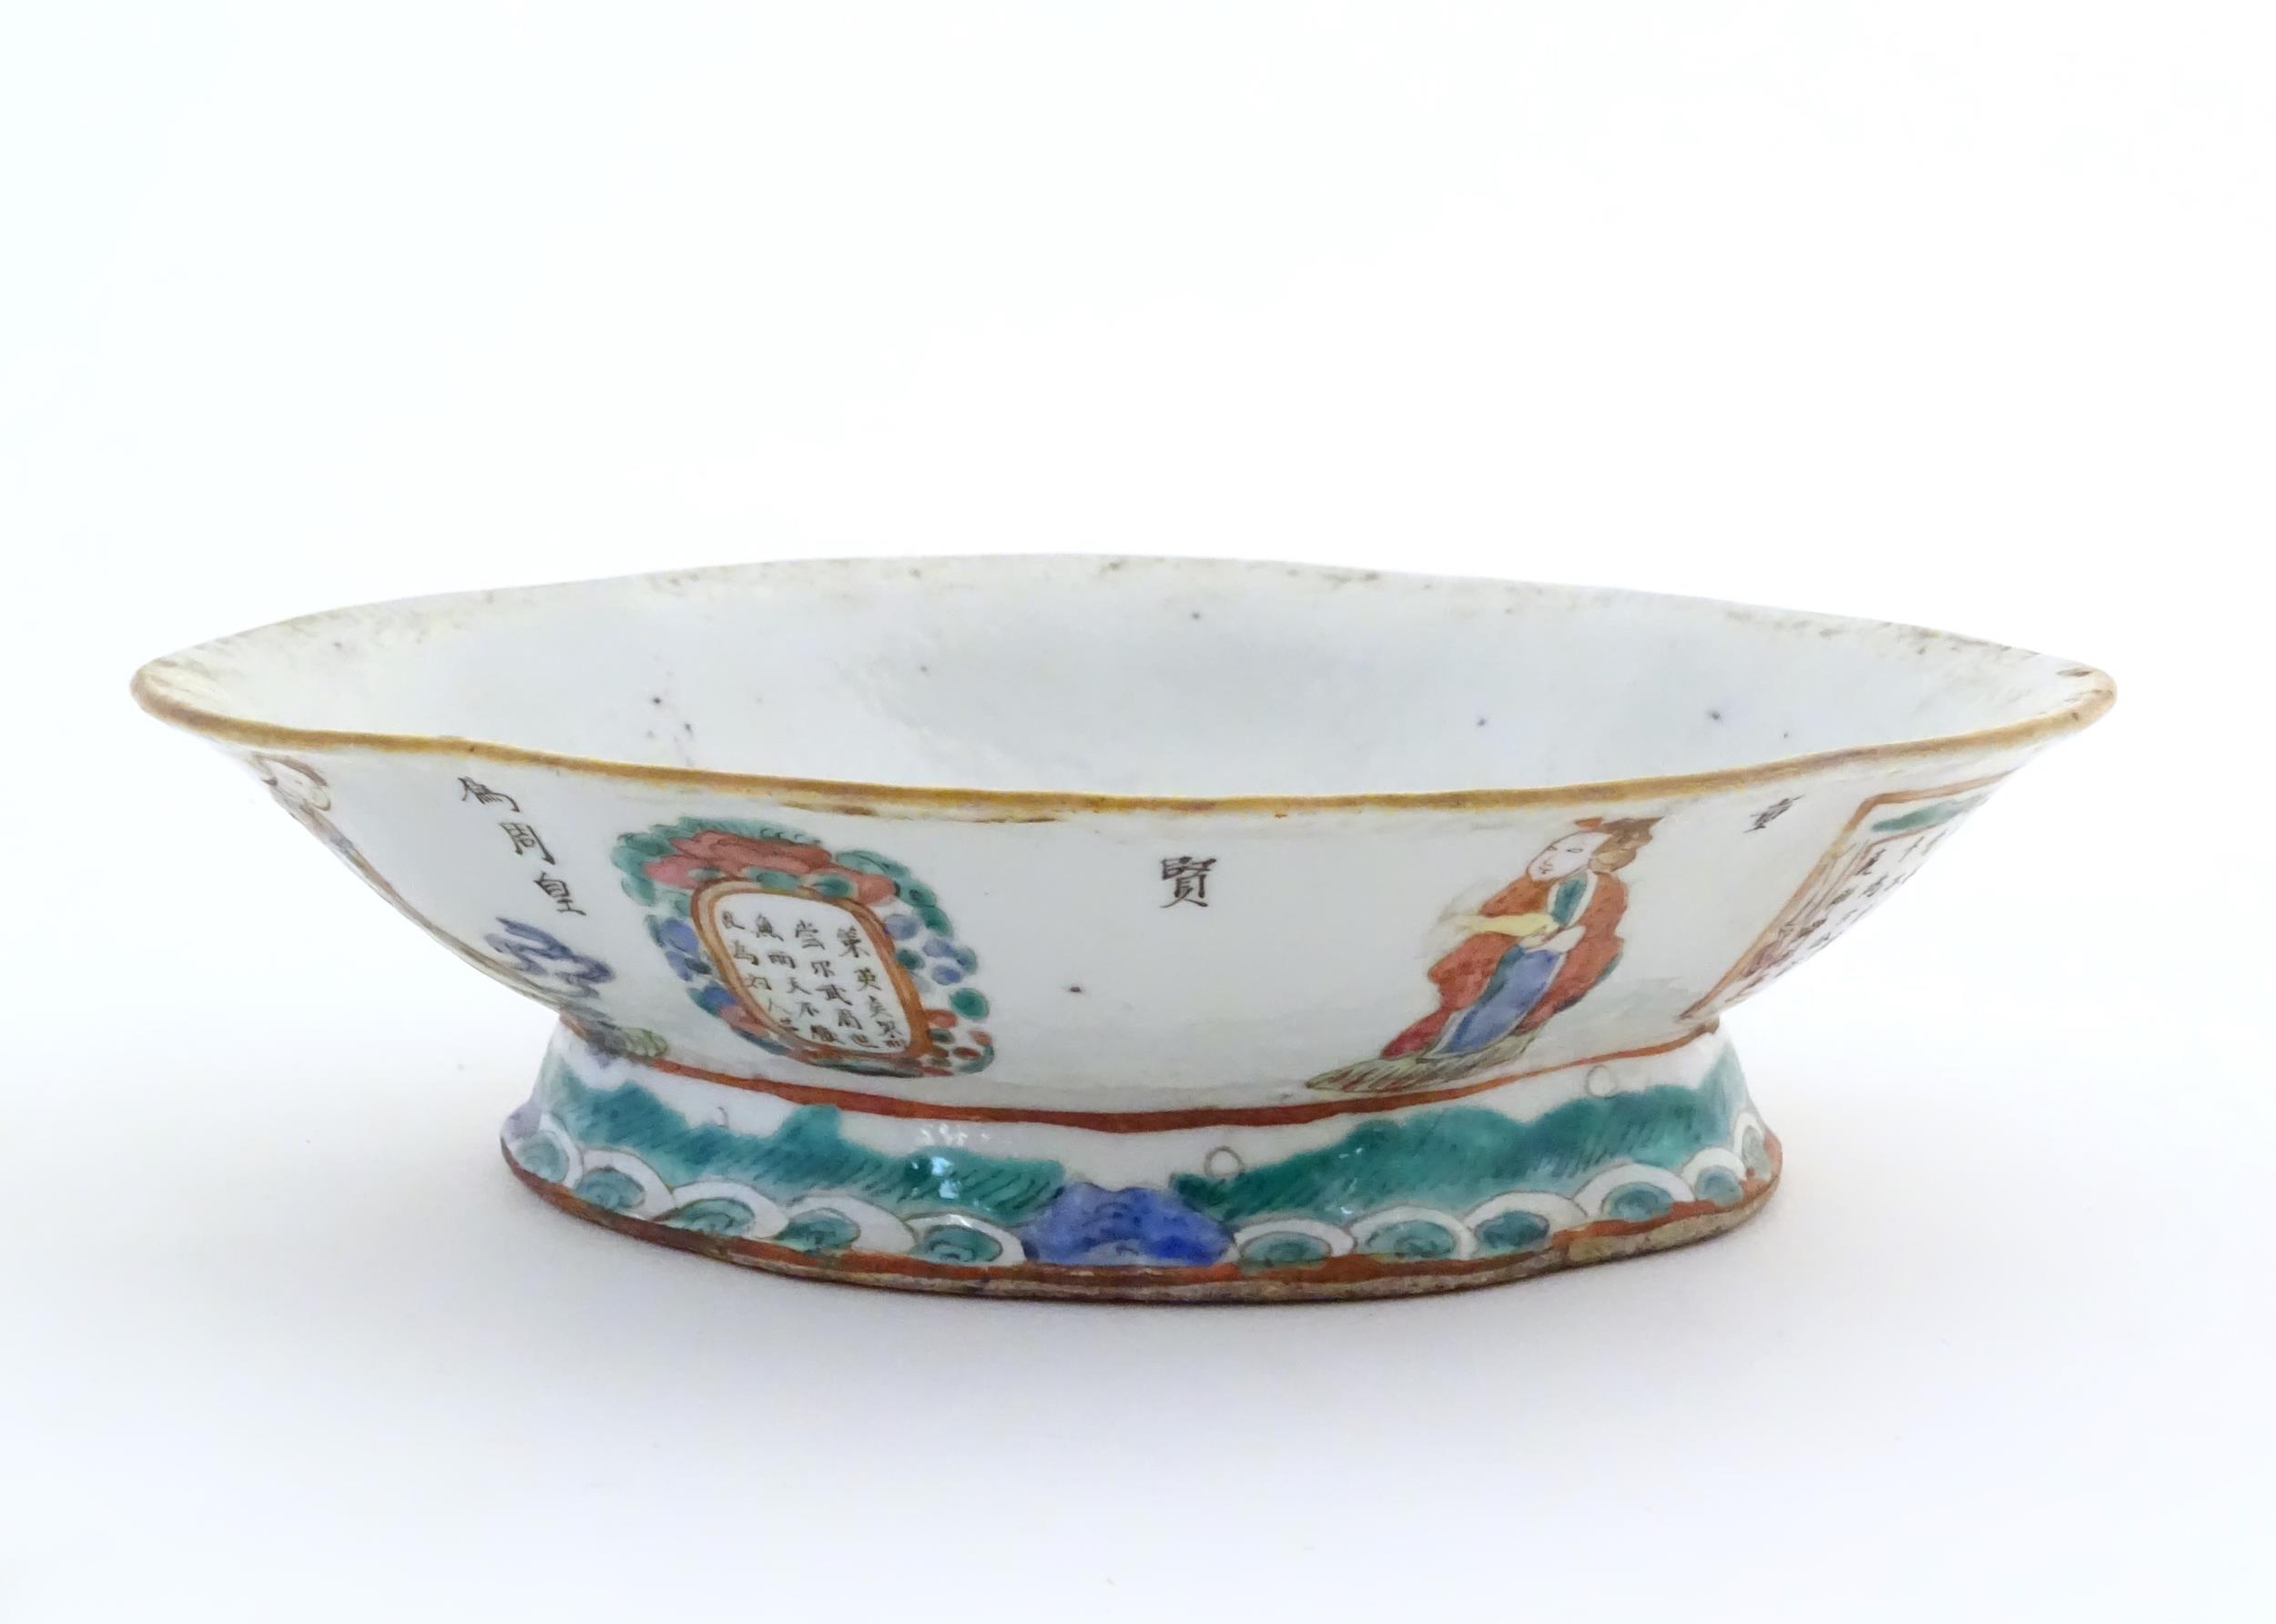 A Chinese footed bowl of lozenge form decorated with figures, vases and Character marks / script. - Image 5 of 6